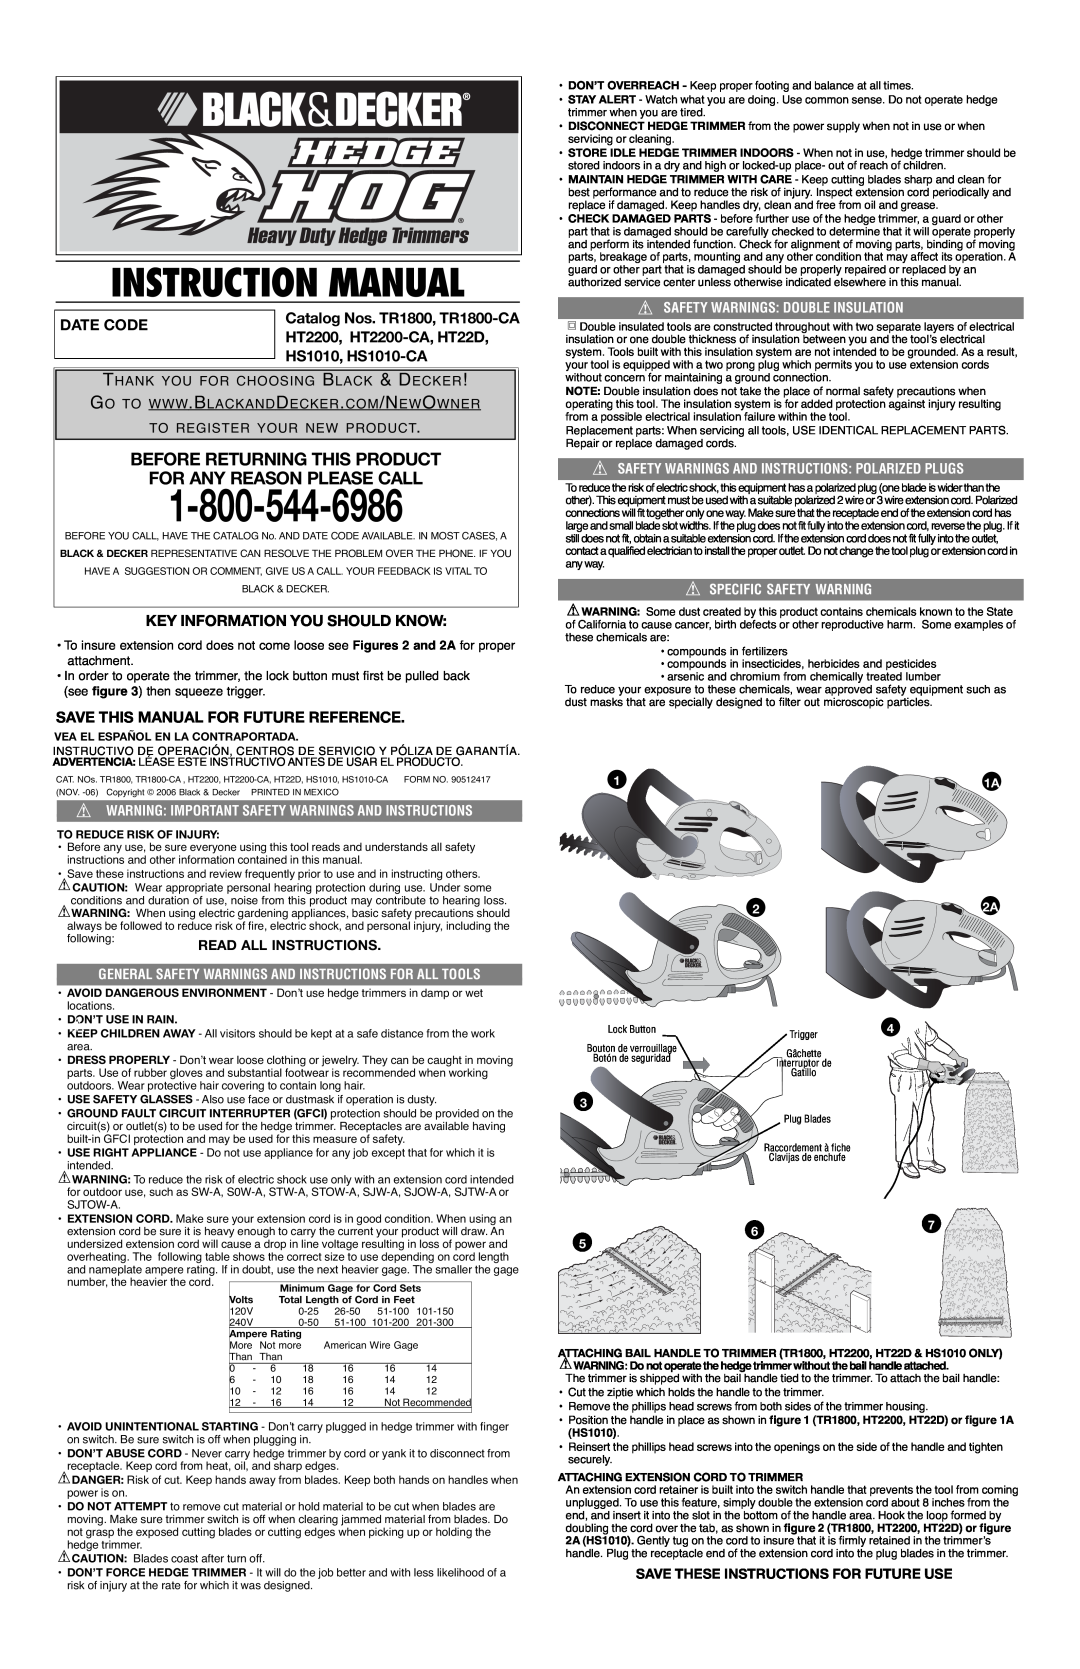 Black & Decker HT22D, HS1010-CA instruction manual Before Returning This Product For Any Reason Please Call, Date Code 